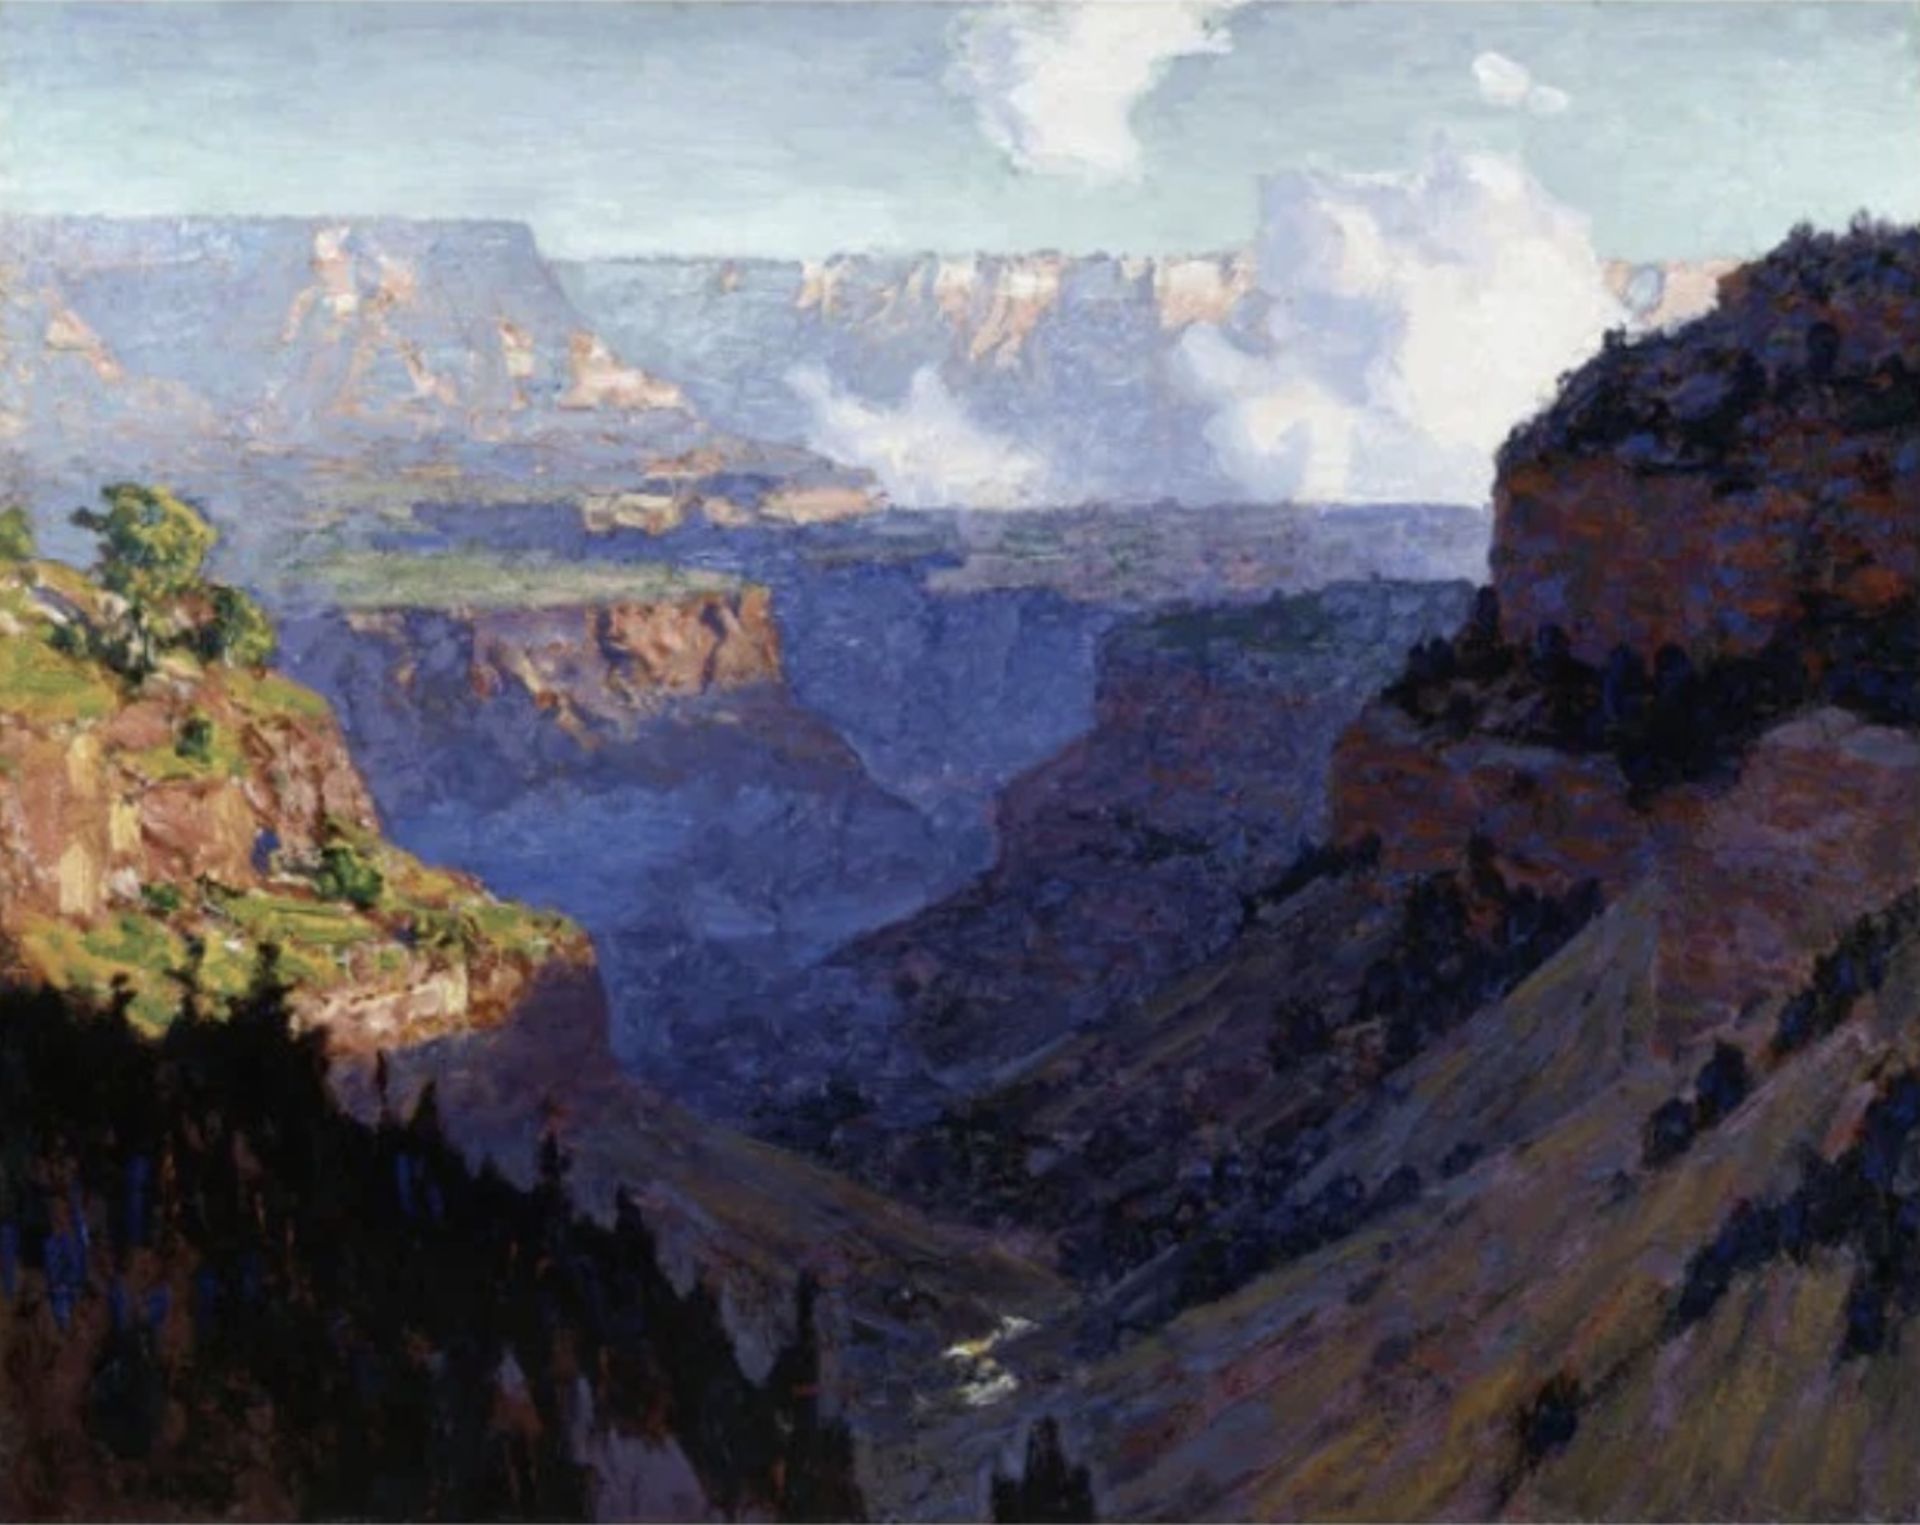 Edward Henry Potthast "Looking across the Grand Canyon, 1910" Print